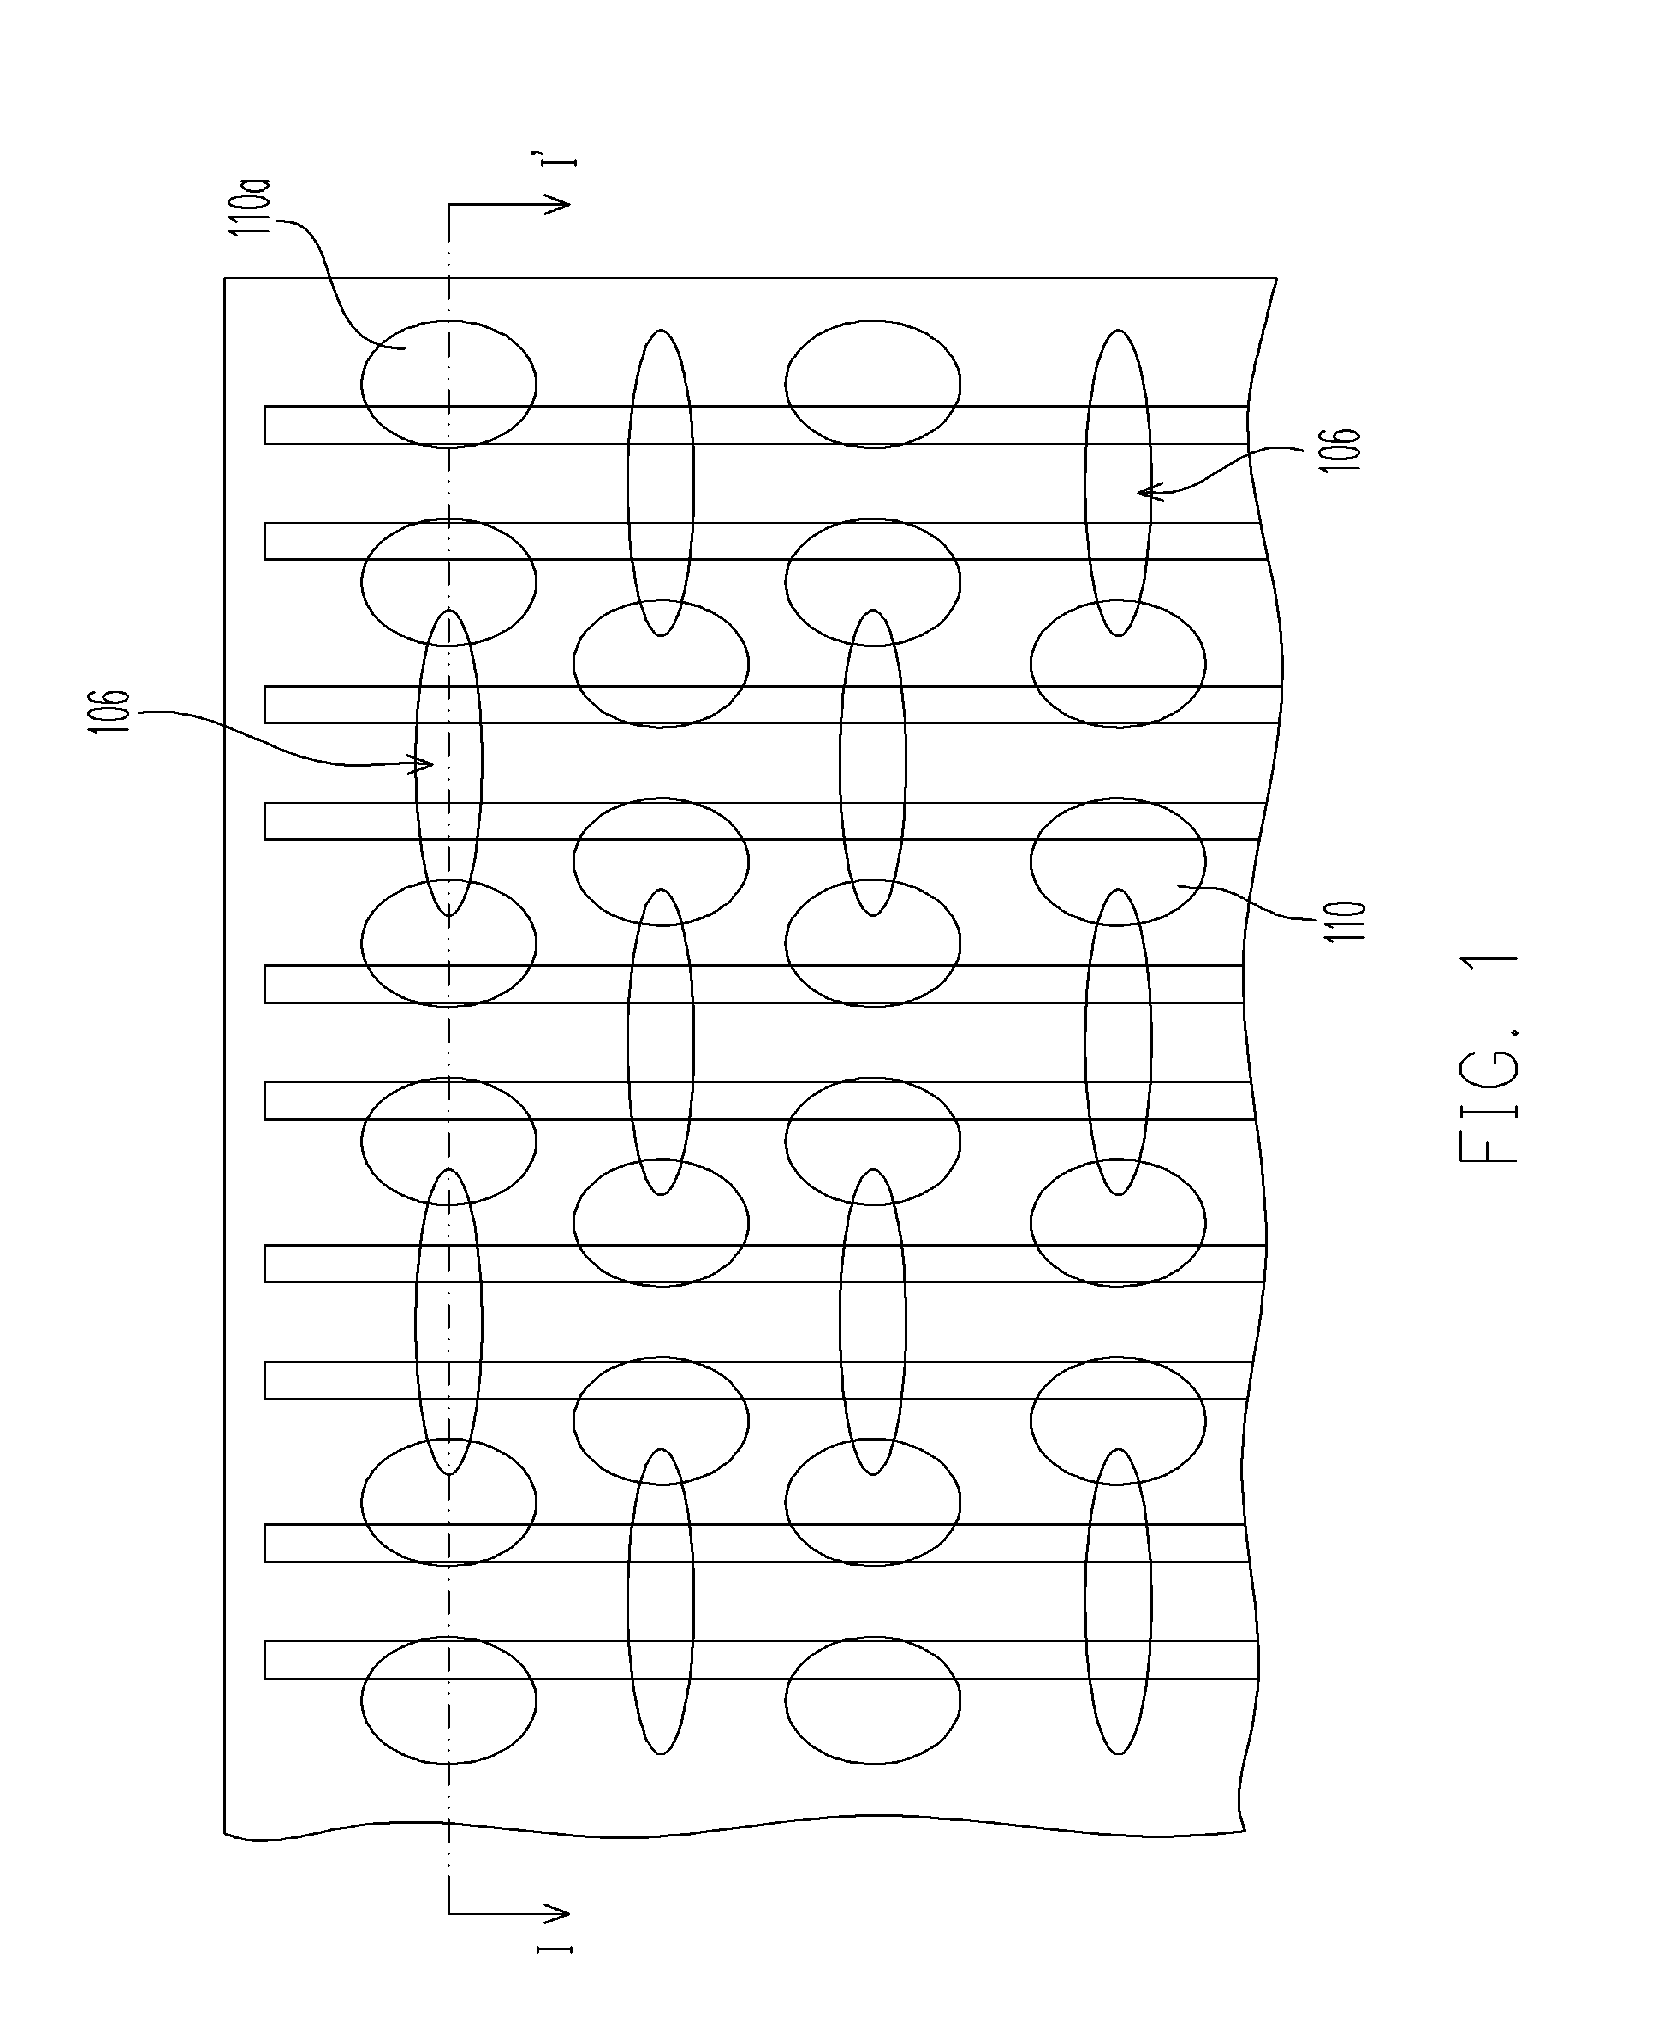 Pick-up structure for dram capacitors and dram process